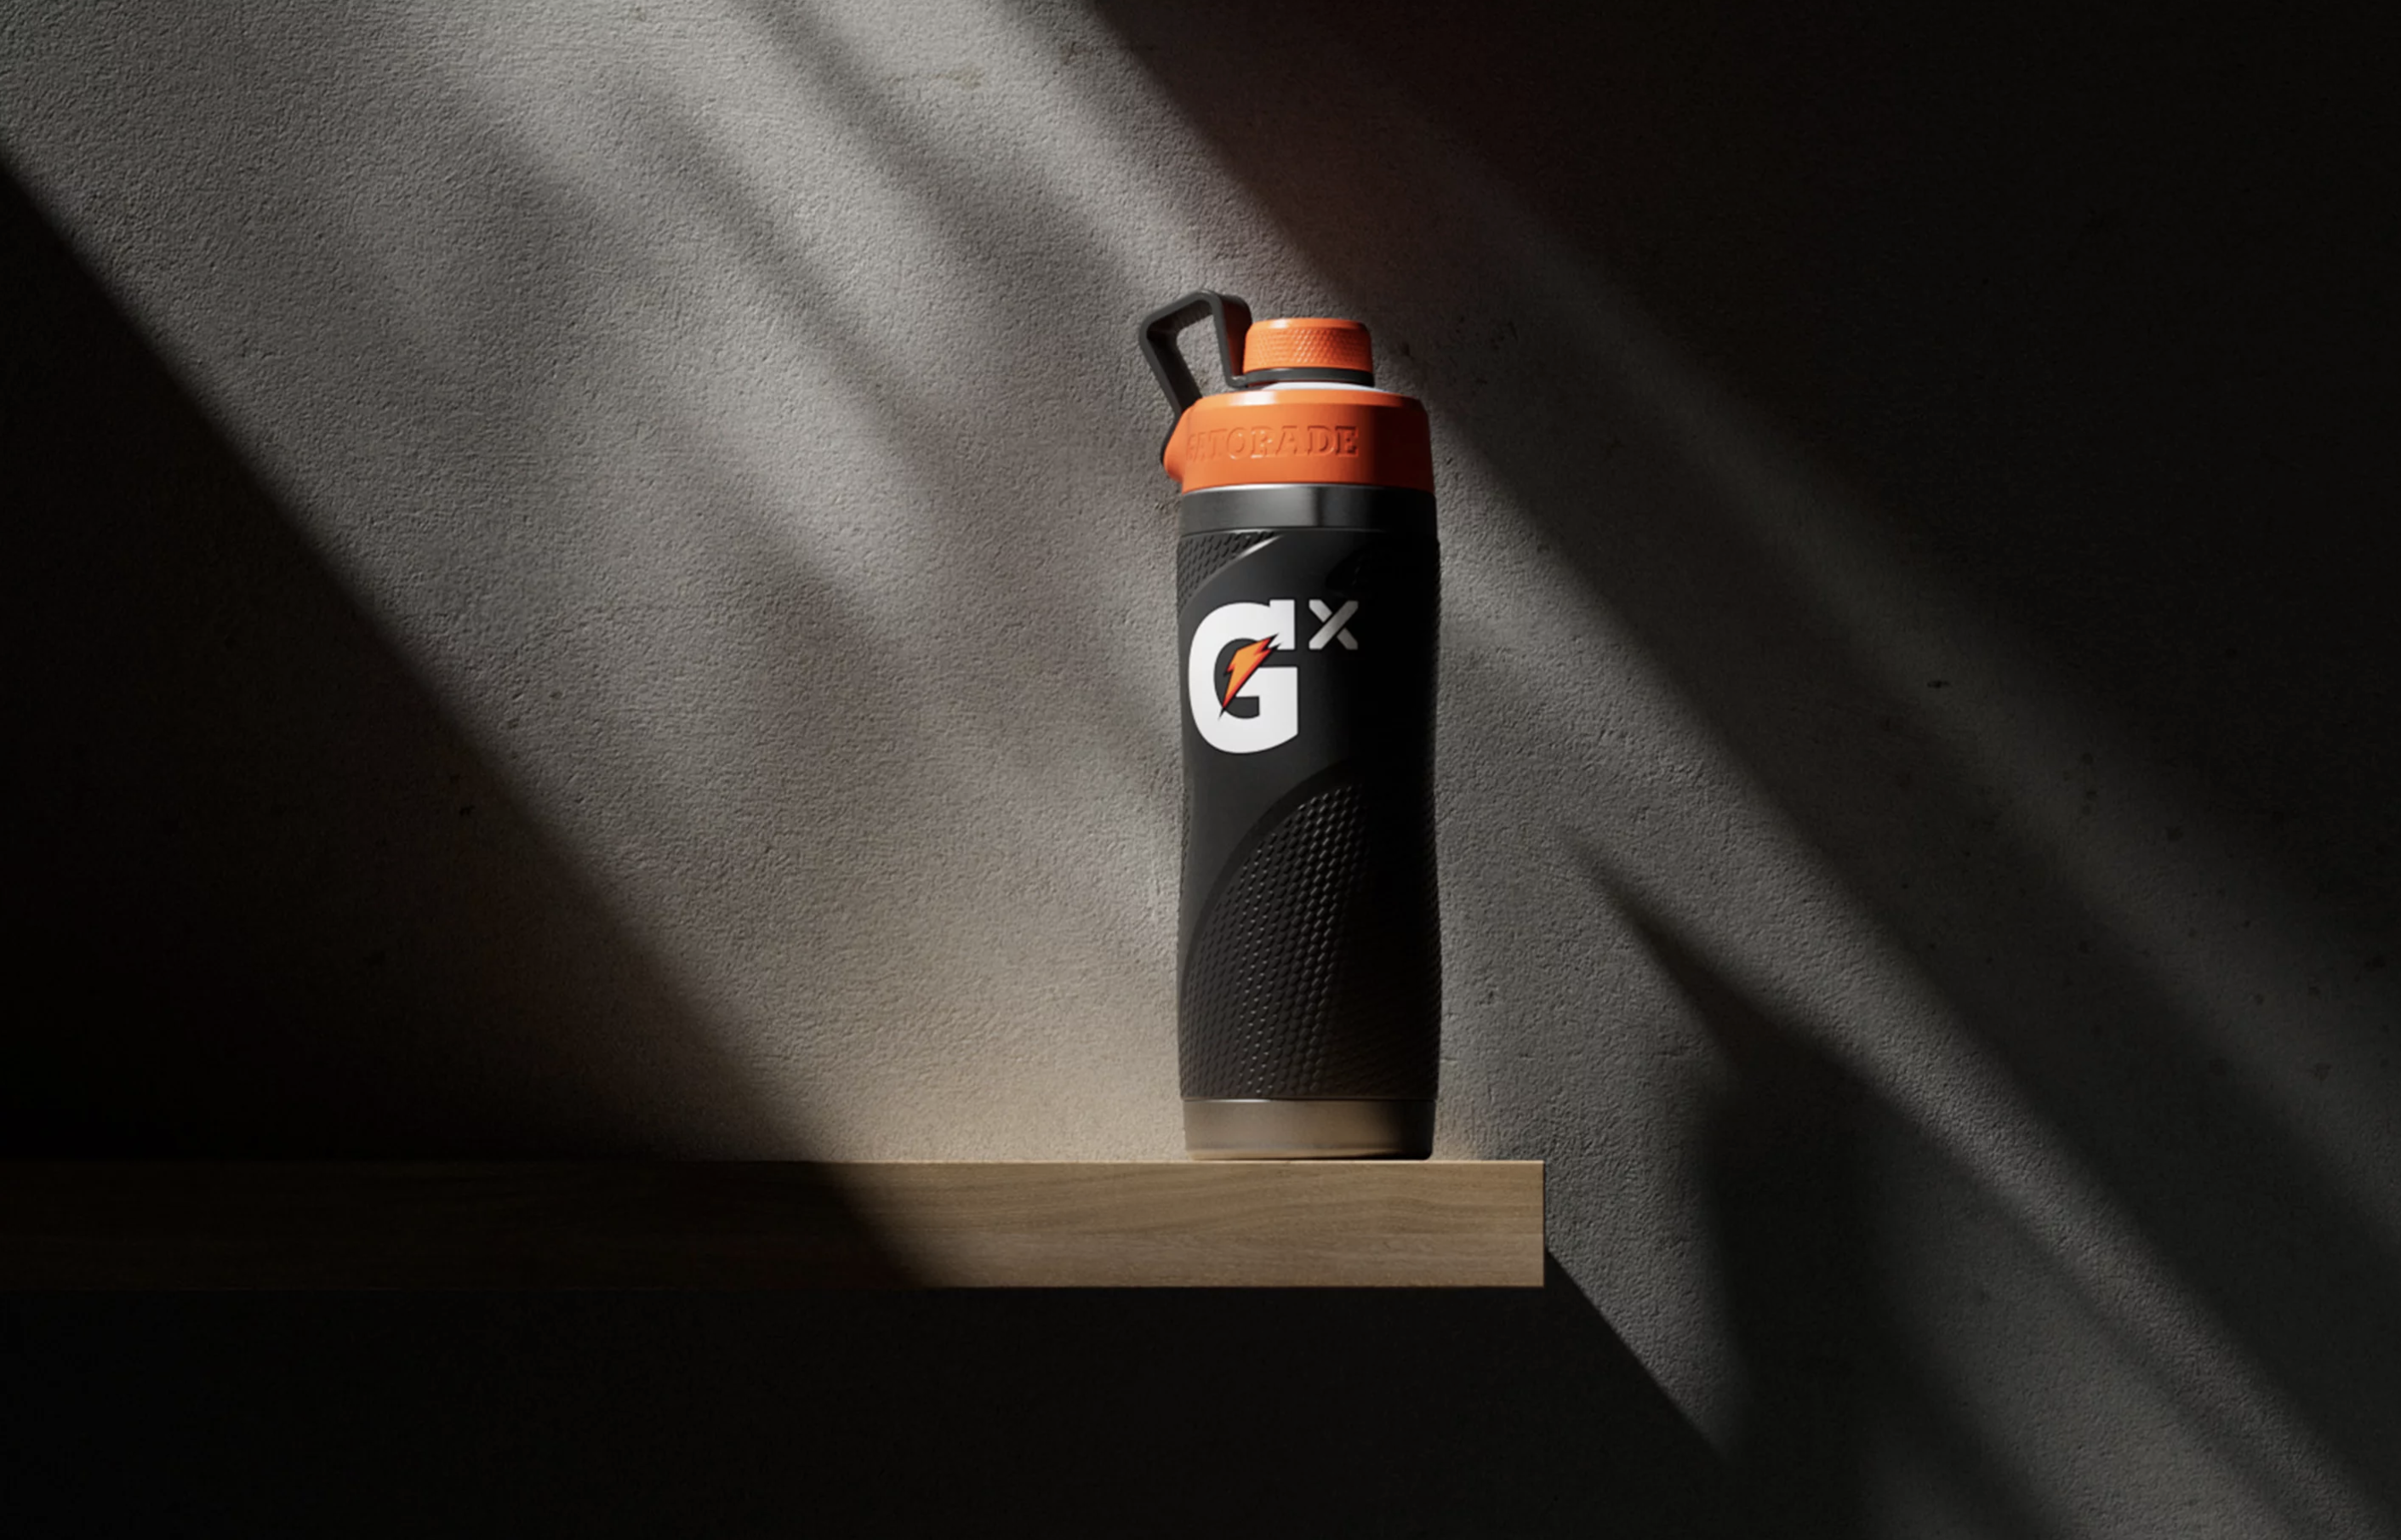 https://tether.com/wp-content/uploads/2022/10/Tether_Gatorade_Gx_StainlessSteelBottle_Solo.png